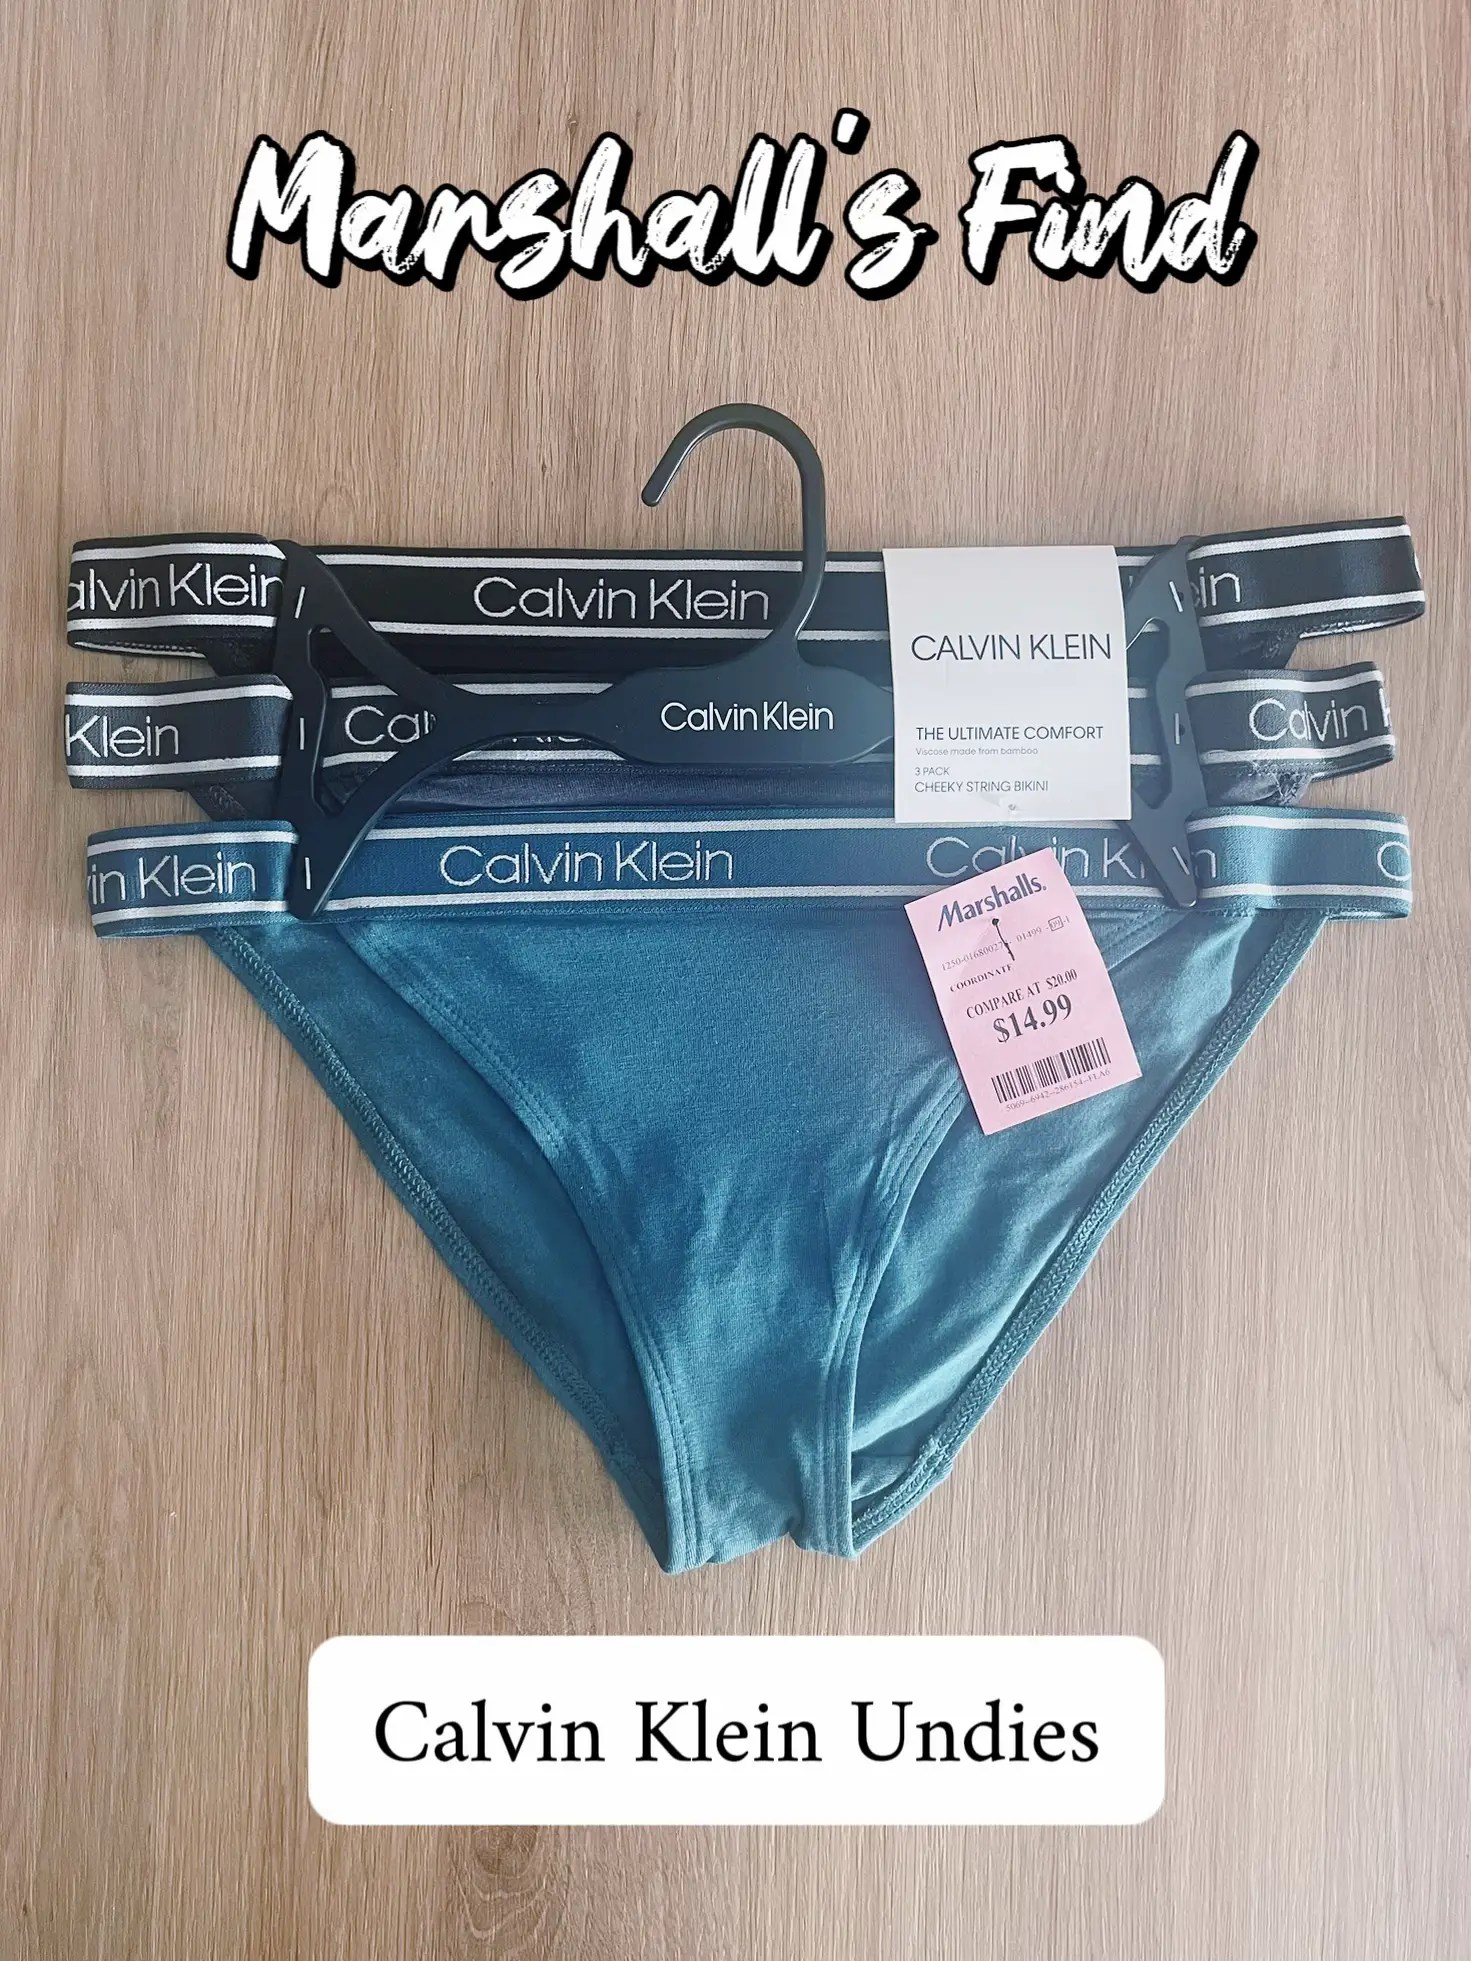 Try-on haul & review of the Auden nursing bras I found at Target. Curr